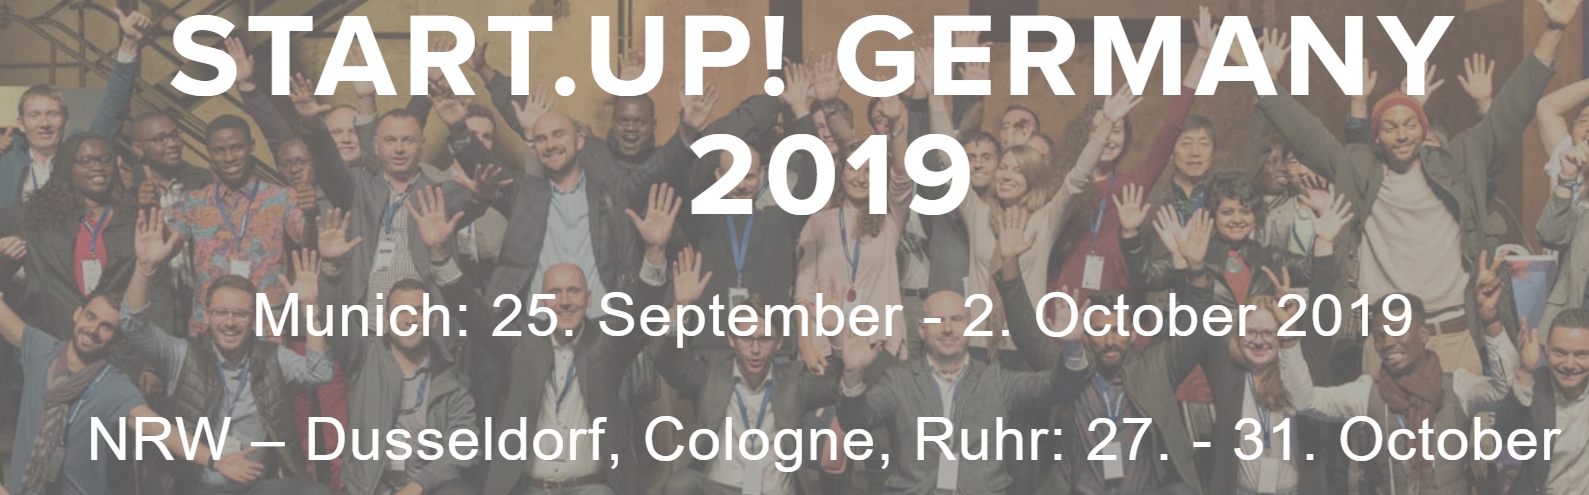 ViewApp takes part in the startup tour “Start.up! Germany 2019 »